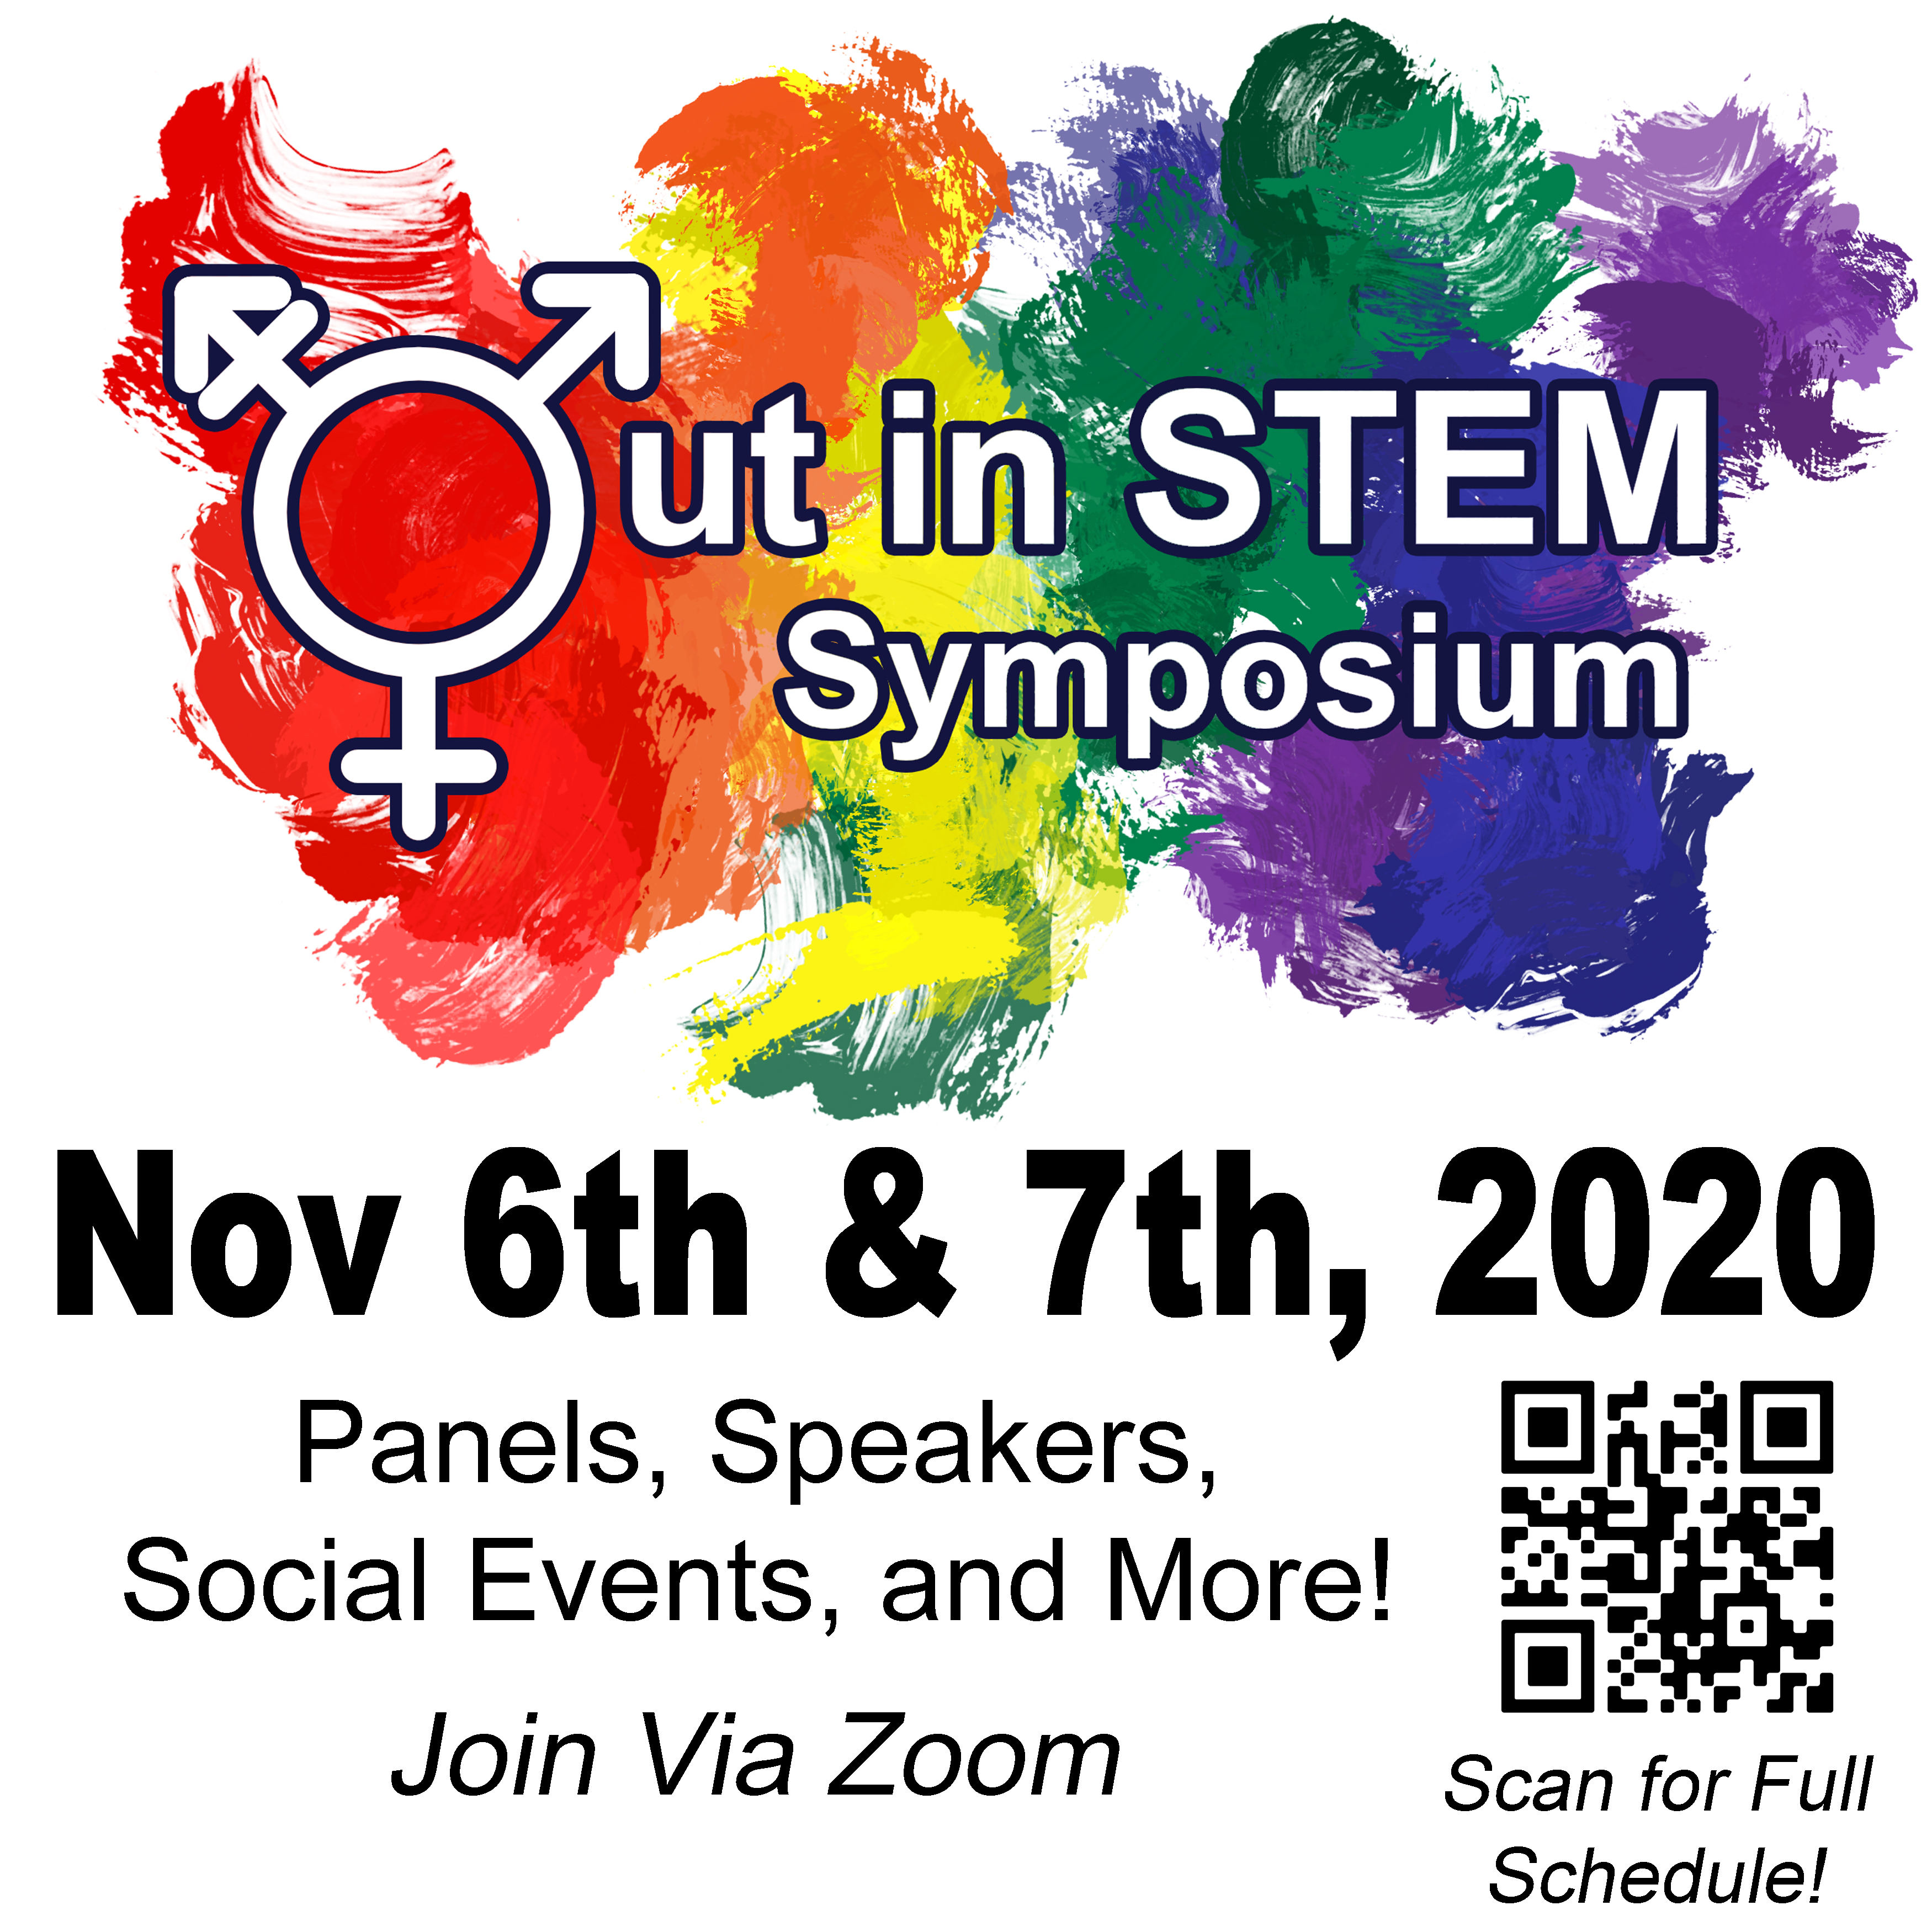 Out in STEM Symposium: Panels, speakers, social events, and more! Scan QR code for full schedule